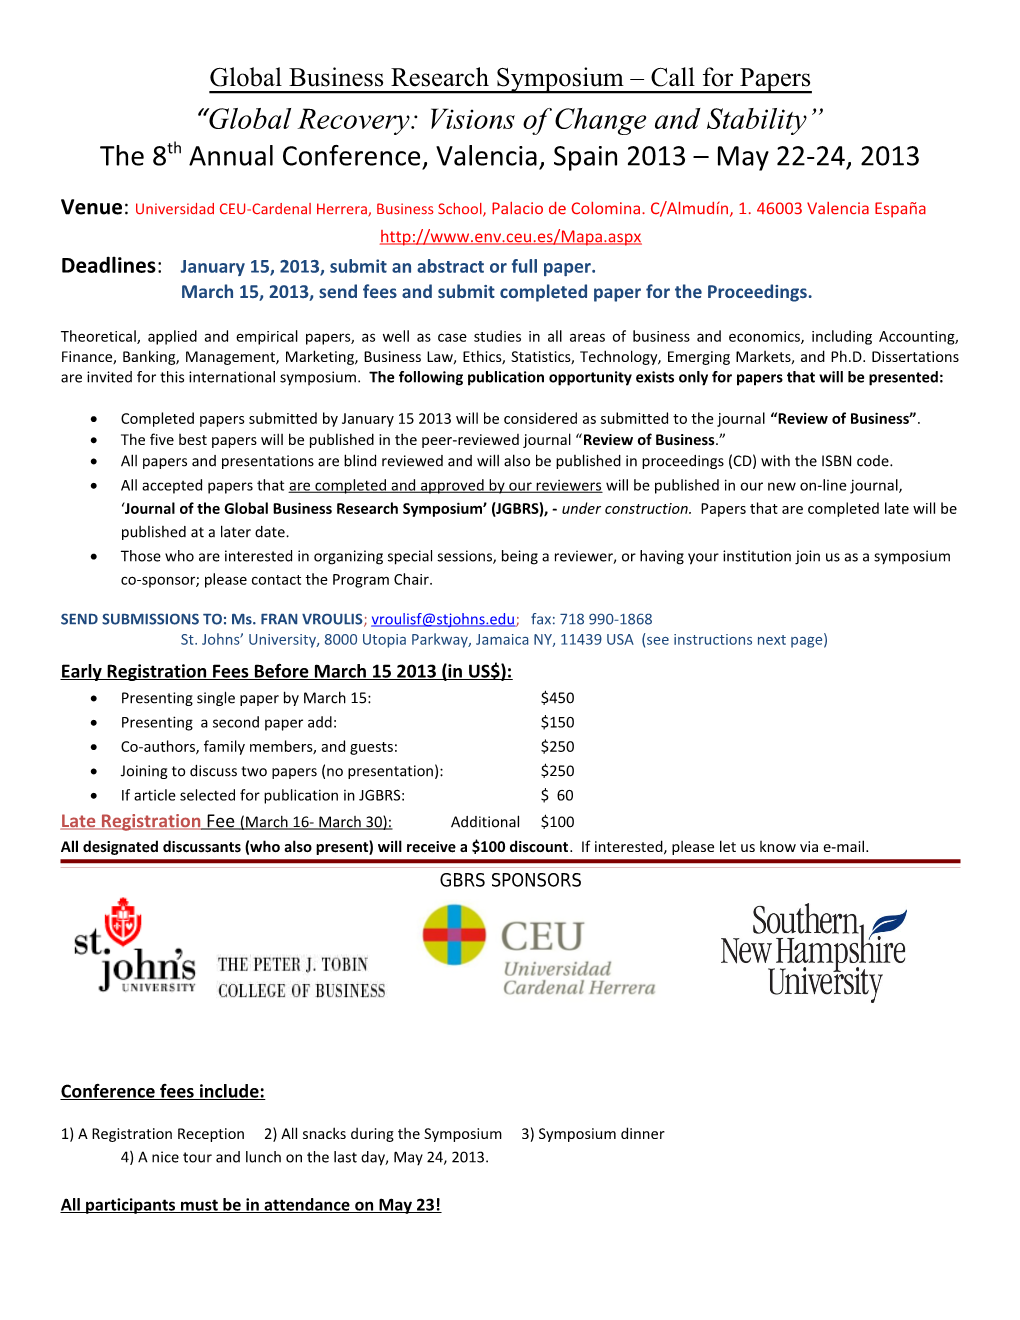 Global Business Research Symposium Call for Papers